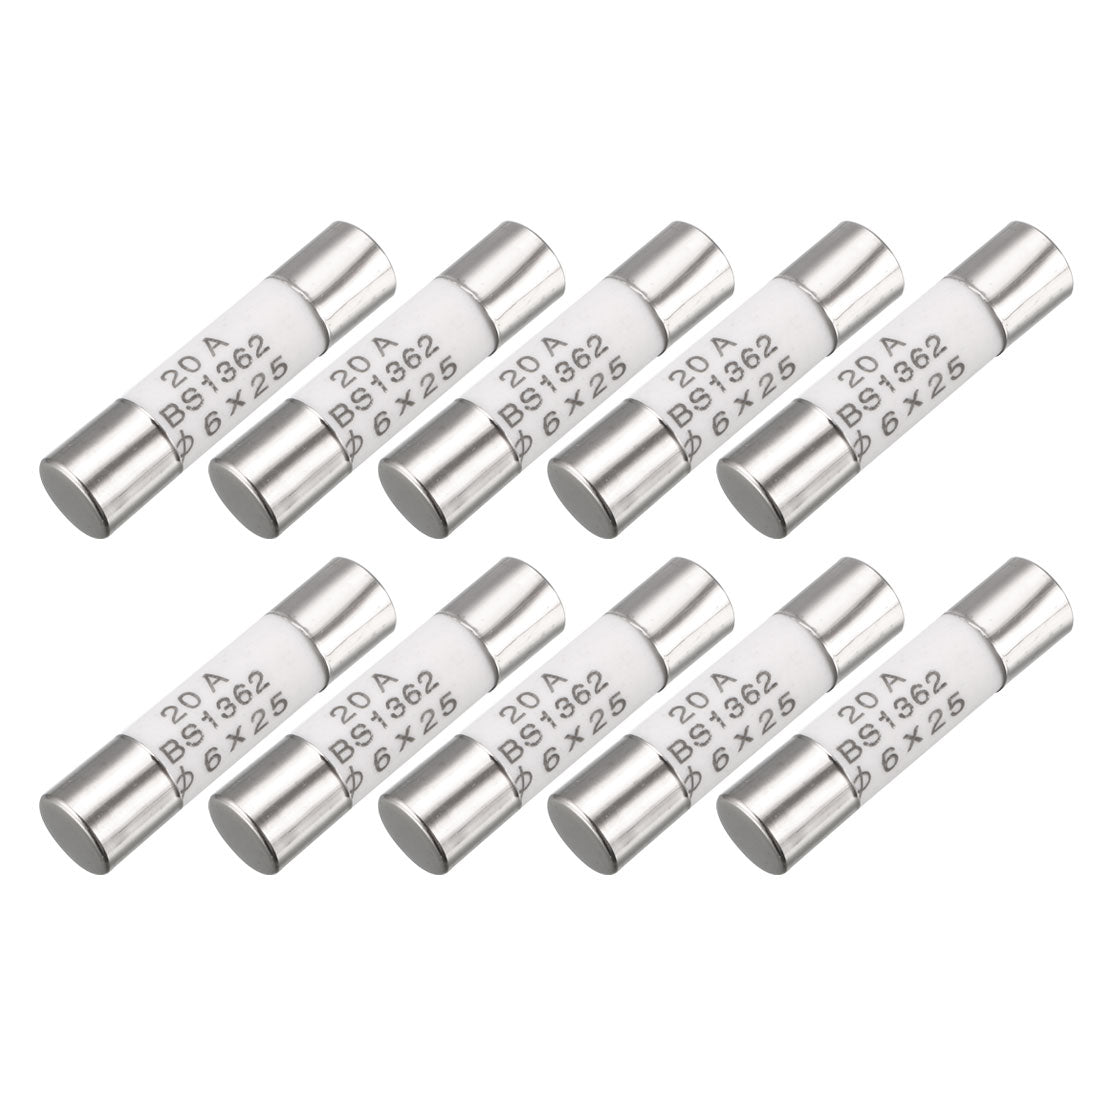 uxcell Uxcell 10 Pcs AC 250V 20A 6mmx25mm BS1362 Cylindrical Ceramic Fuses Tube